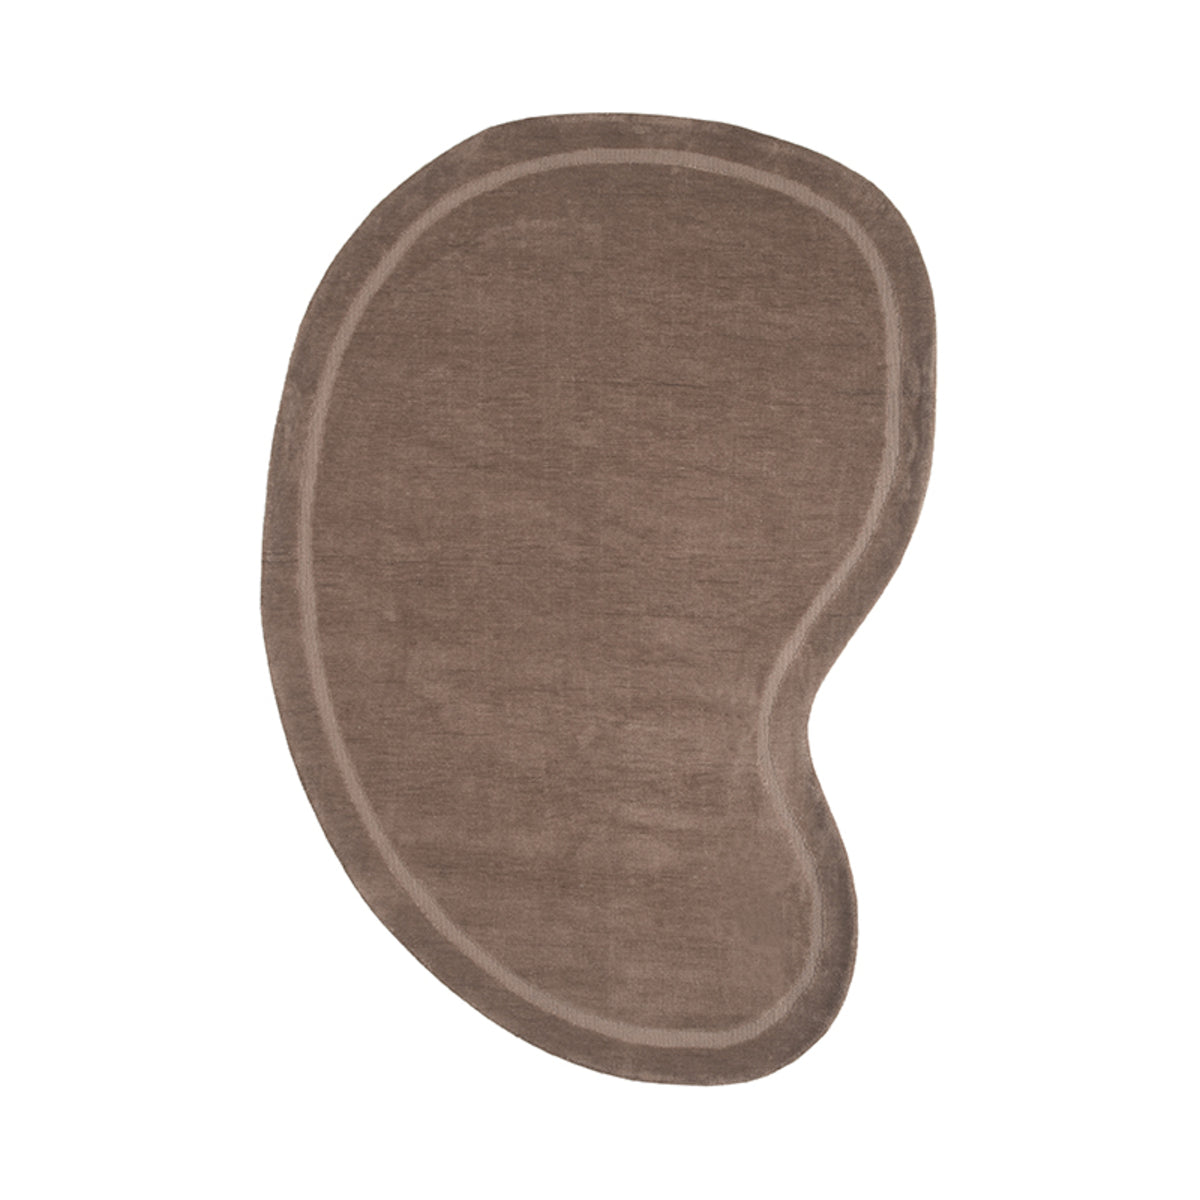 LABEL51 Rugs Mody - Taupe - Synthetic - 200x300 cm